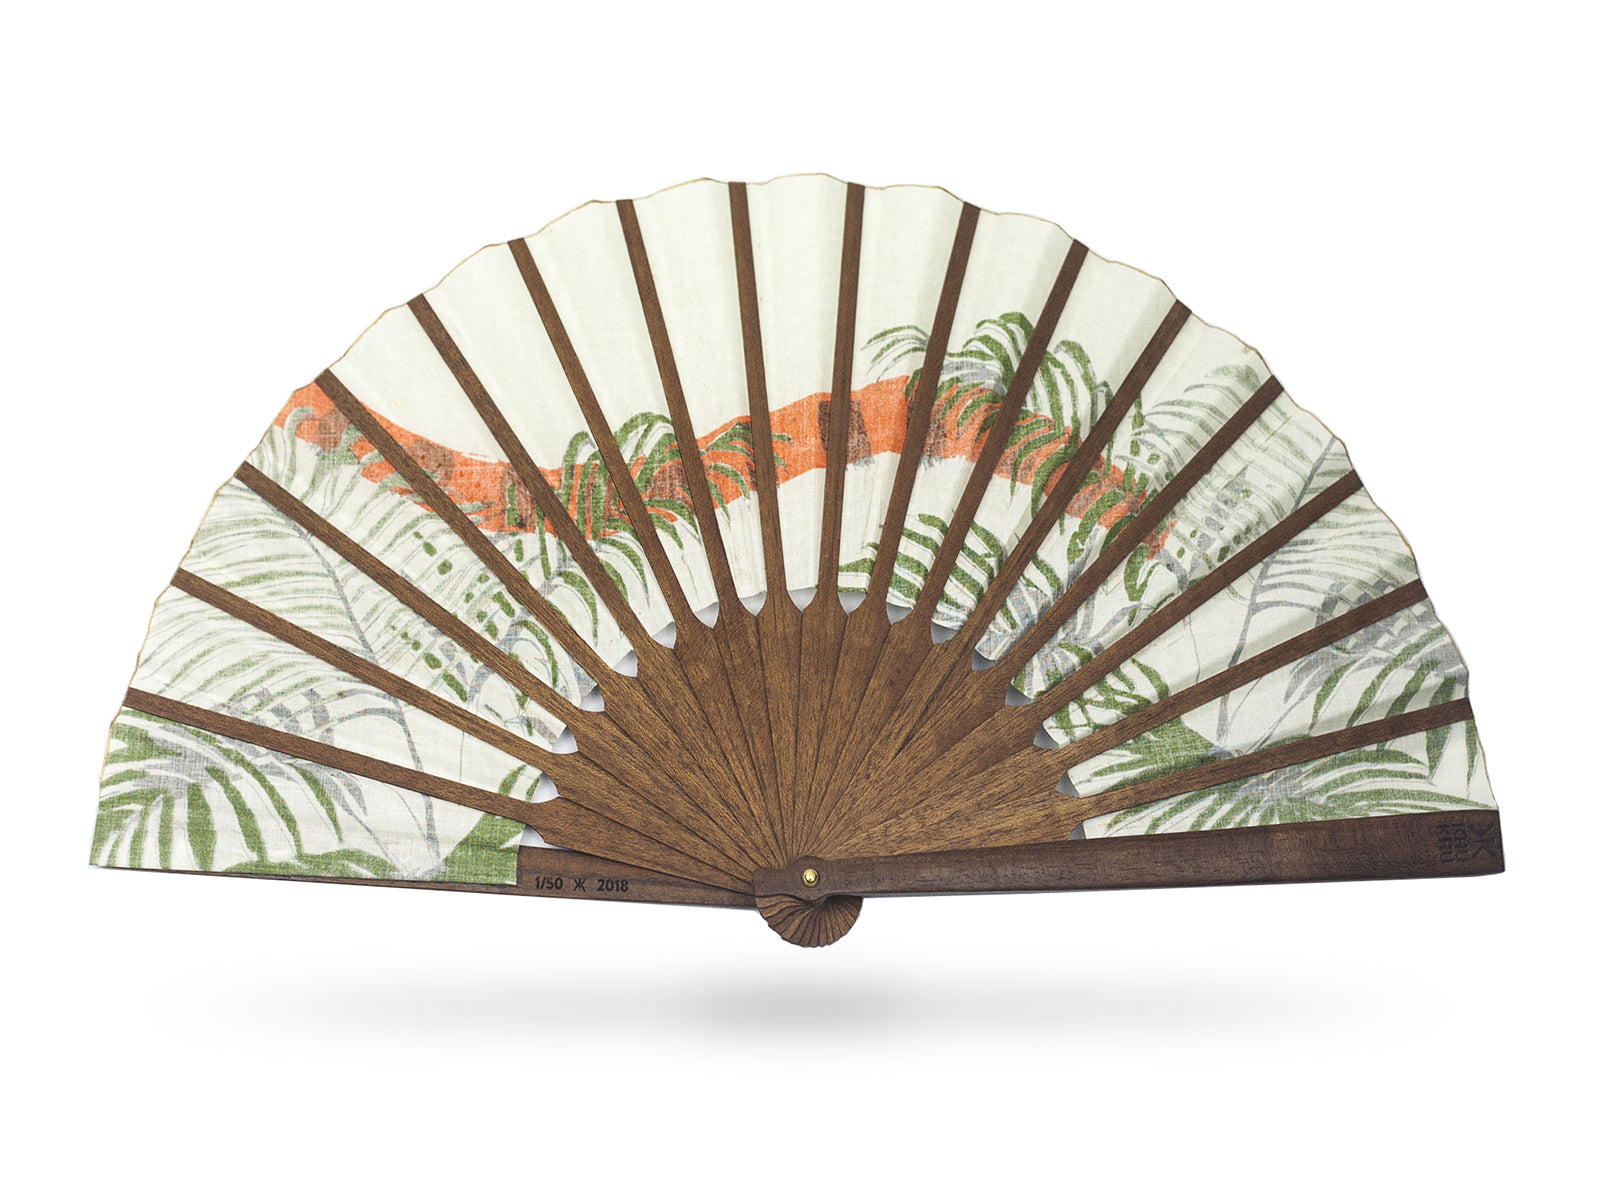 View of the back of Khu Khu Indian Tiger luxury hand-fan. Hand screen printed orange and black Indian Tiger tail swishes through tropical green fern leaves with cream background mounted with premium cherry wood in exclusive Khu Khu shape with polished brass rivets. .